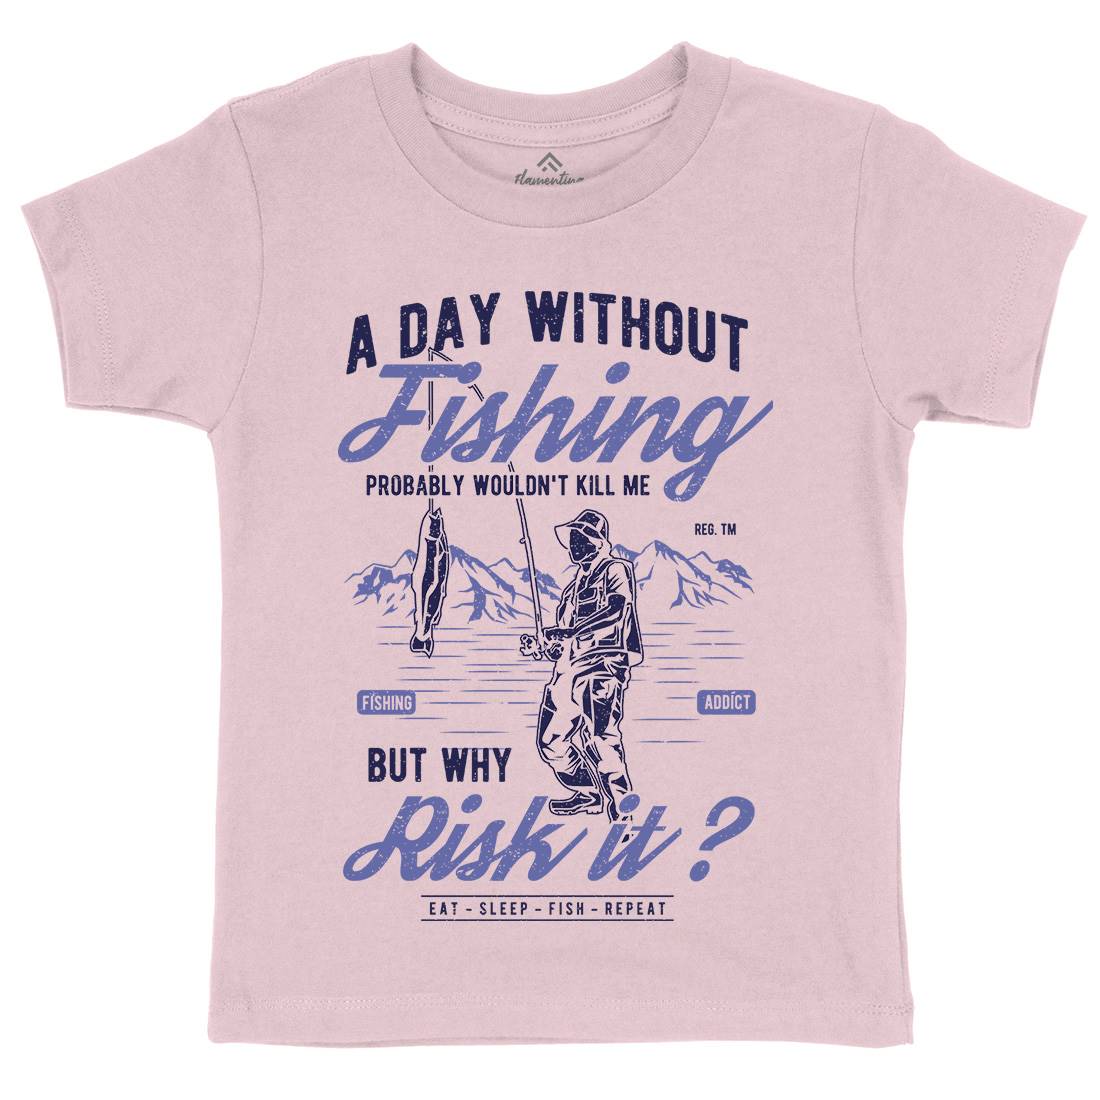 A Day Without Kids Crew Neck T-Shirt Fishing A602